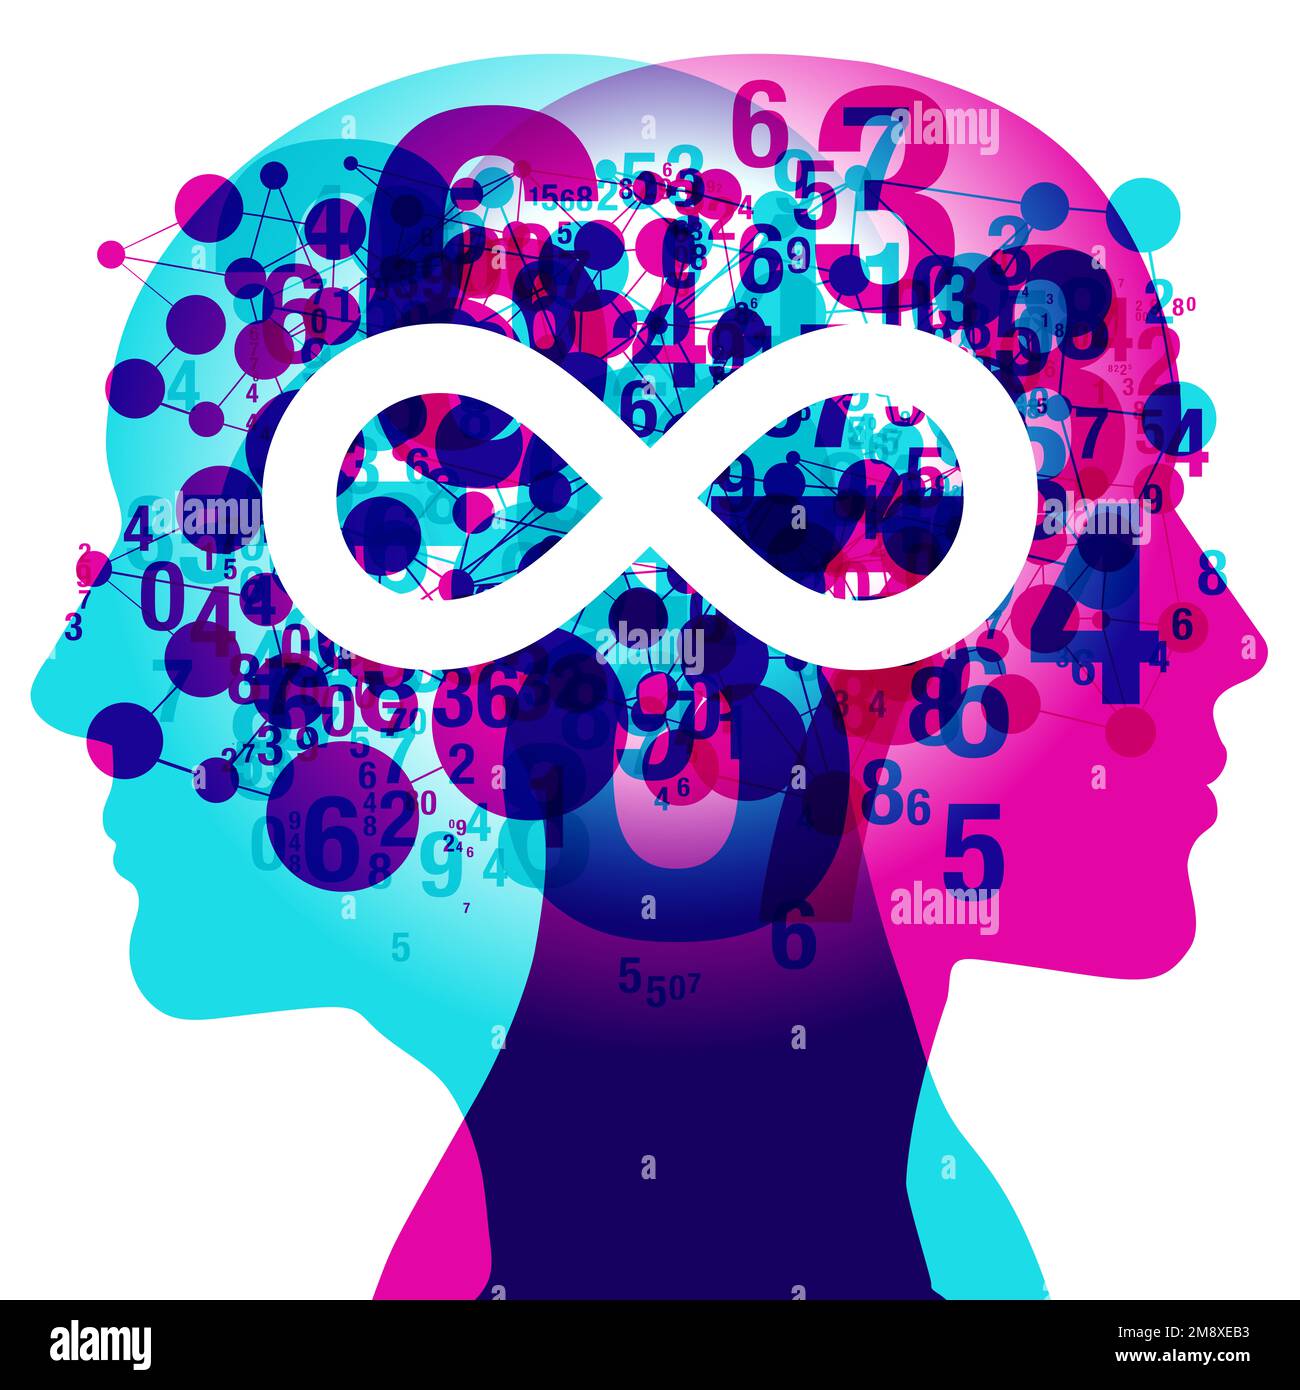 2 figures side silhouettes overlaid with semi-transparent numerals and line connected shapes. Centrally placed is a large white “Infinity” symbol. Stock Photo